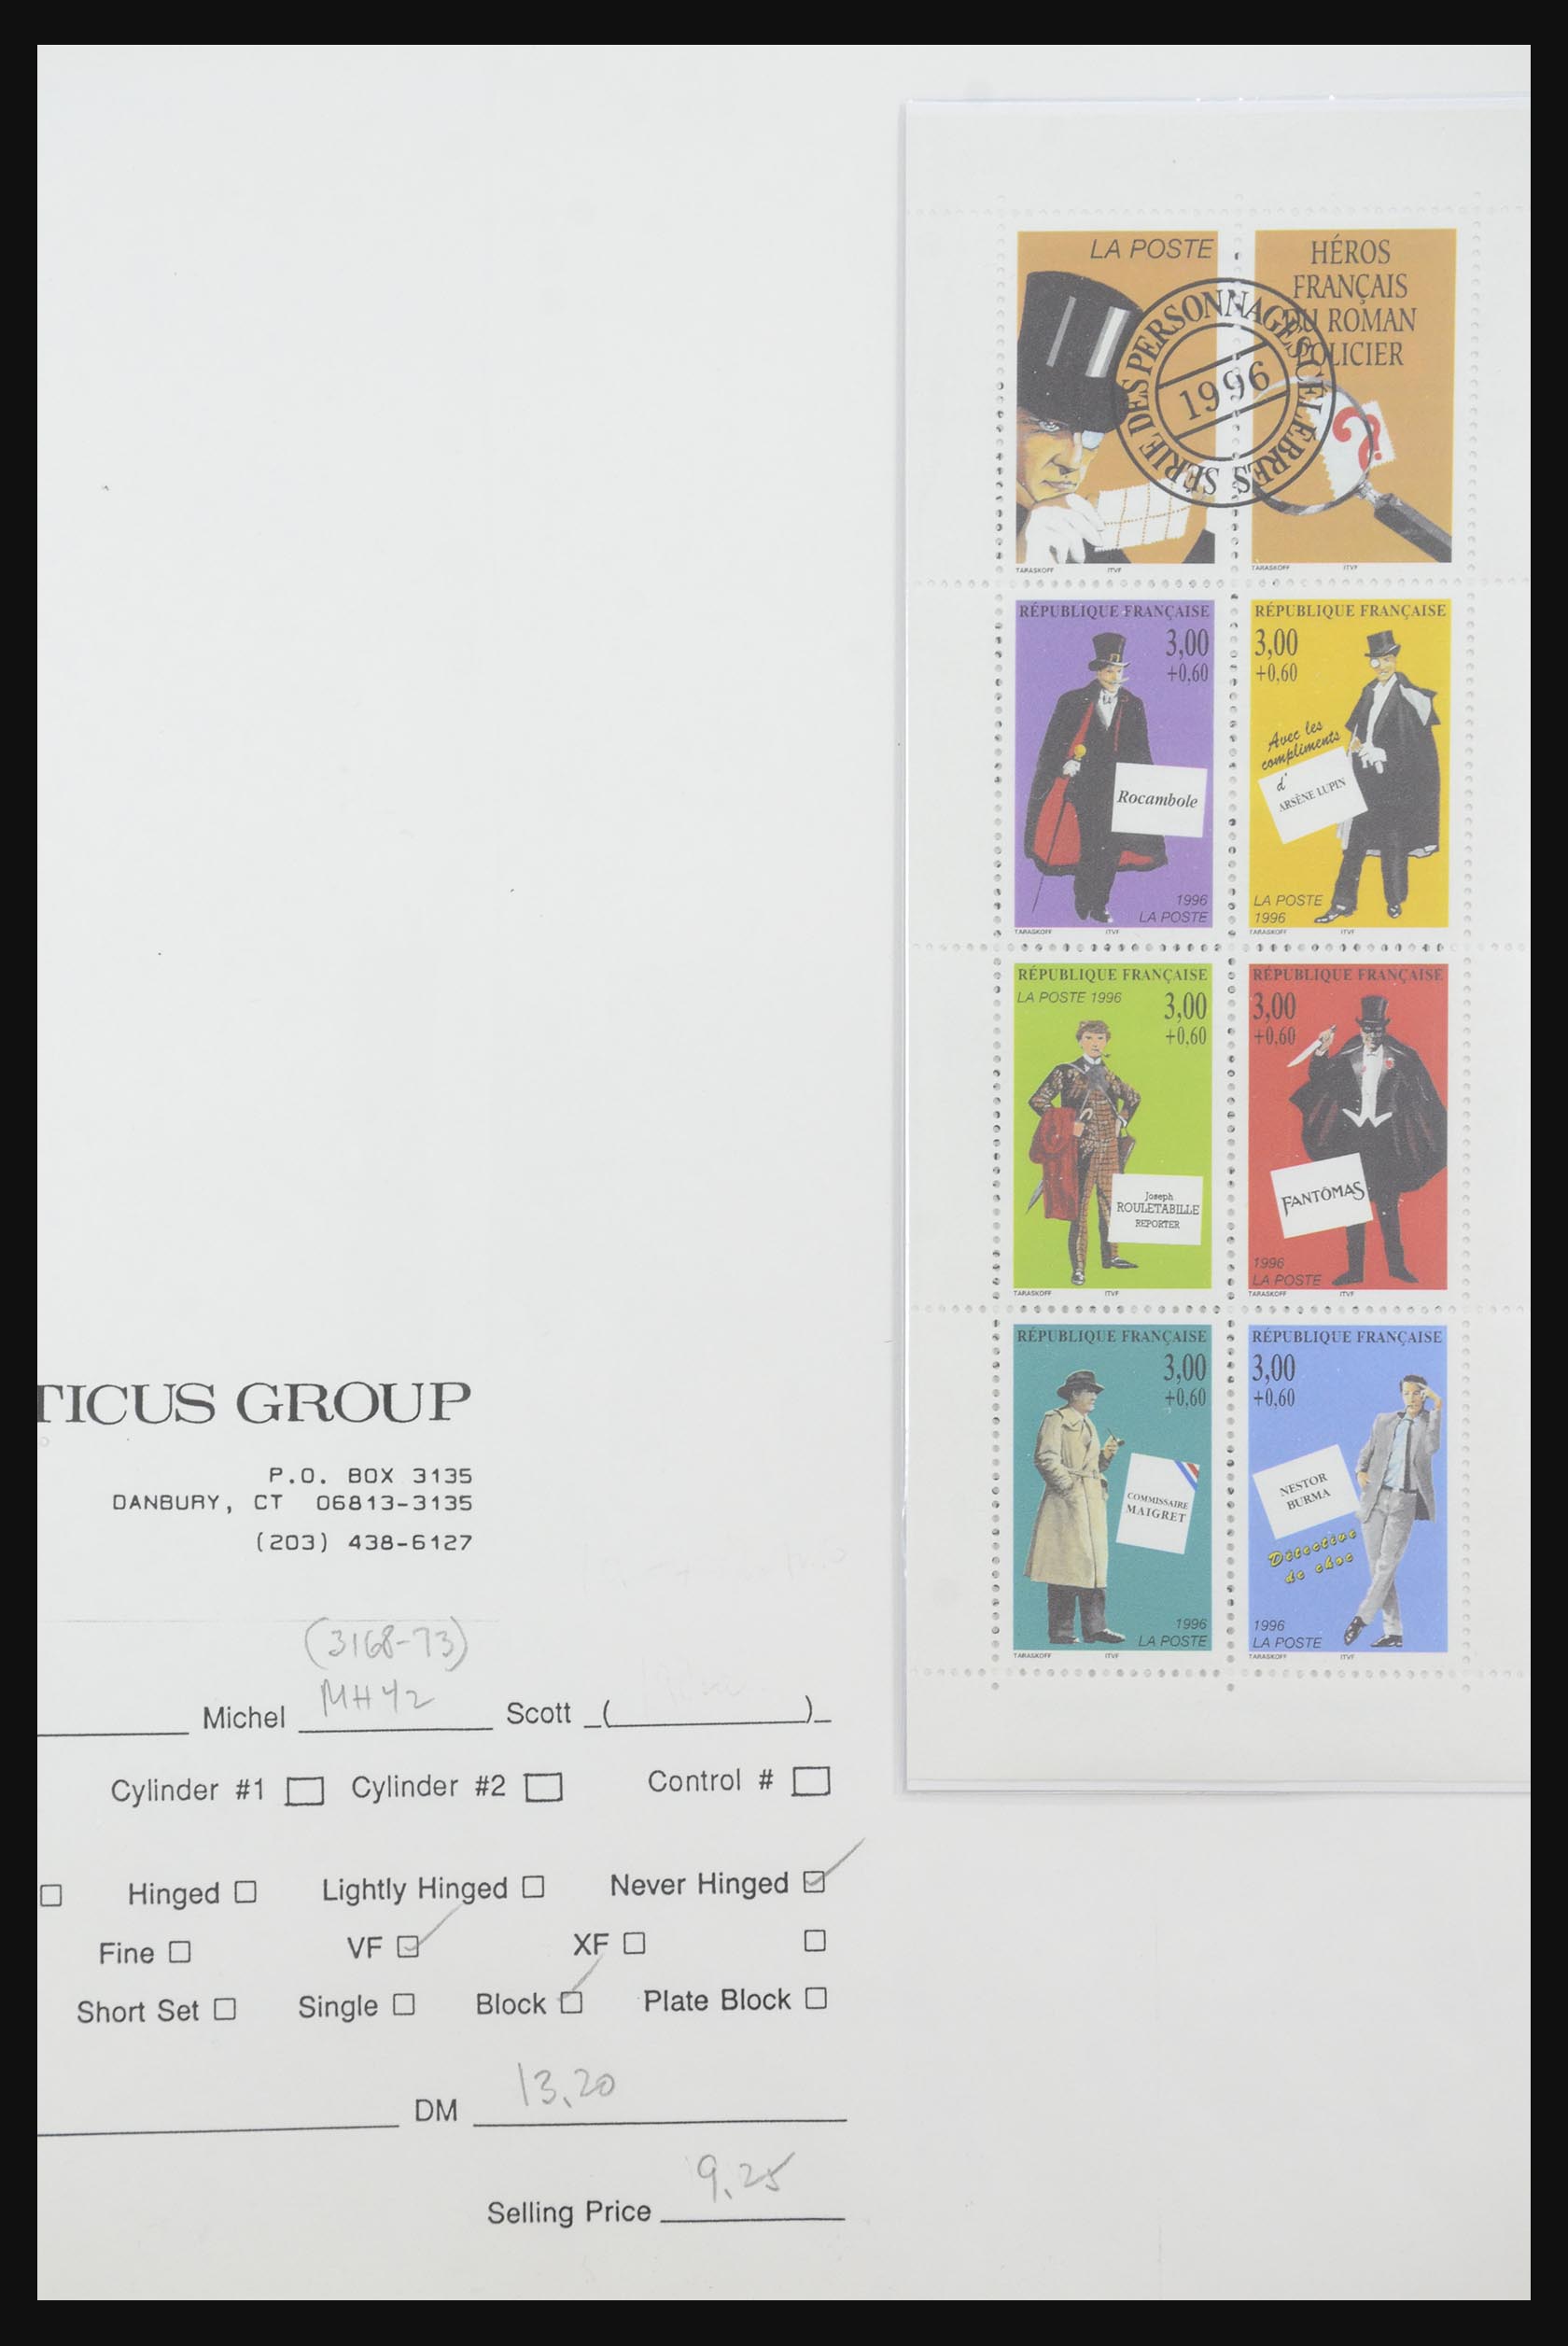 31915 063 - 31915 Western Europe souvenir sheets and stamp booklets on FDC.